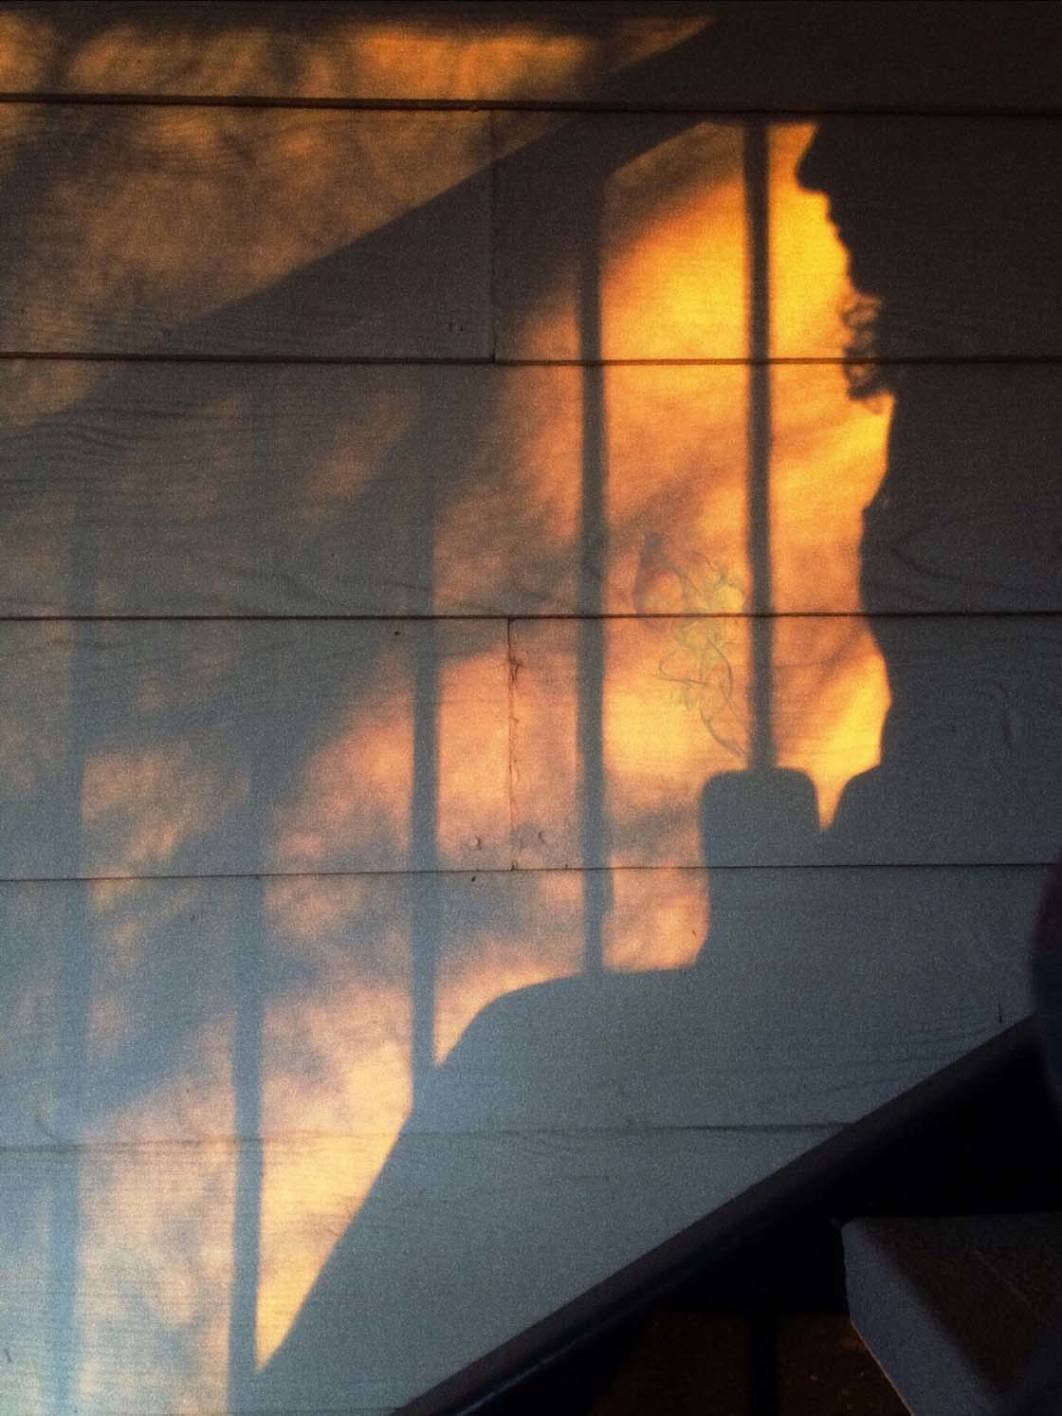 30 Incredible iPhone Photos Of Mysterious & Intriguing Shadows